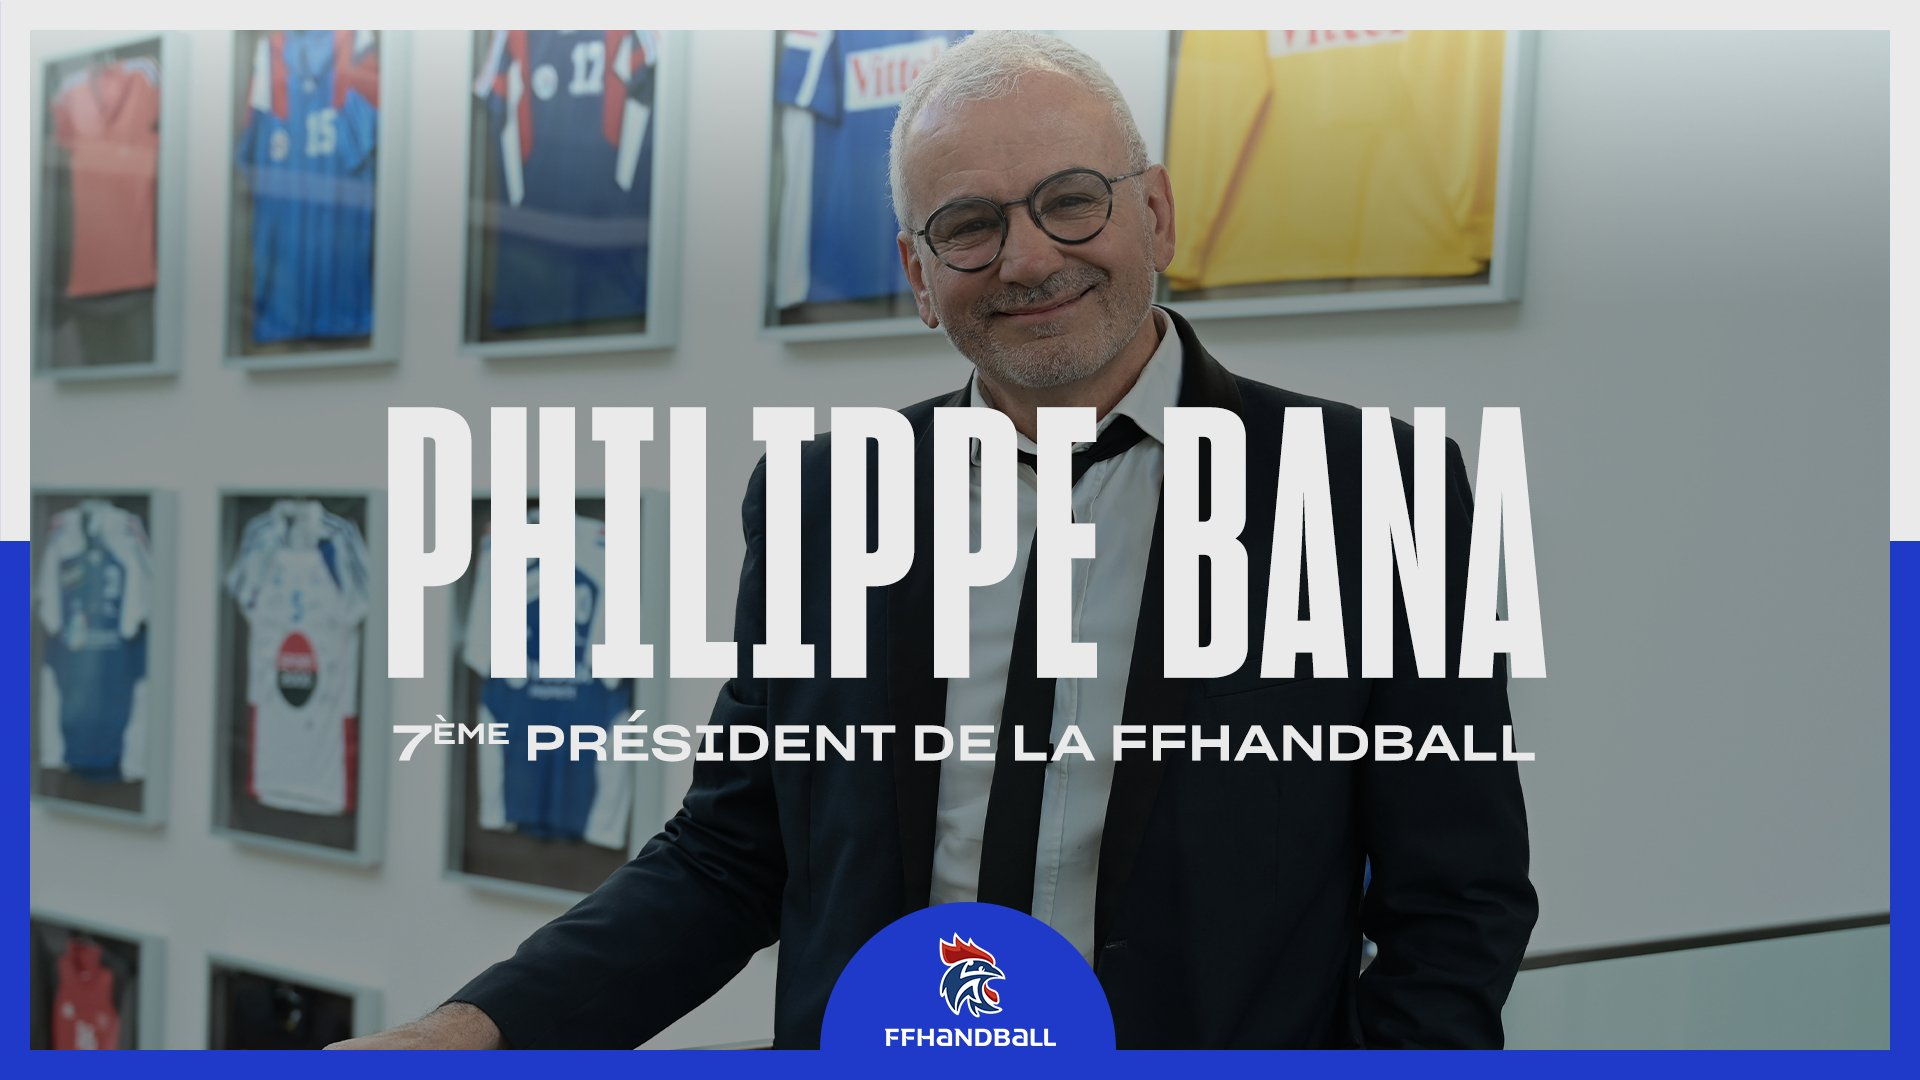 Bana elected French Handball Federation President in build-up to Paris 2024